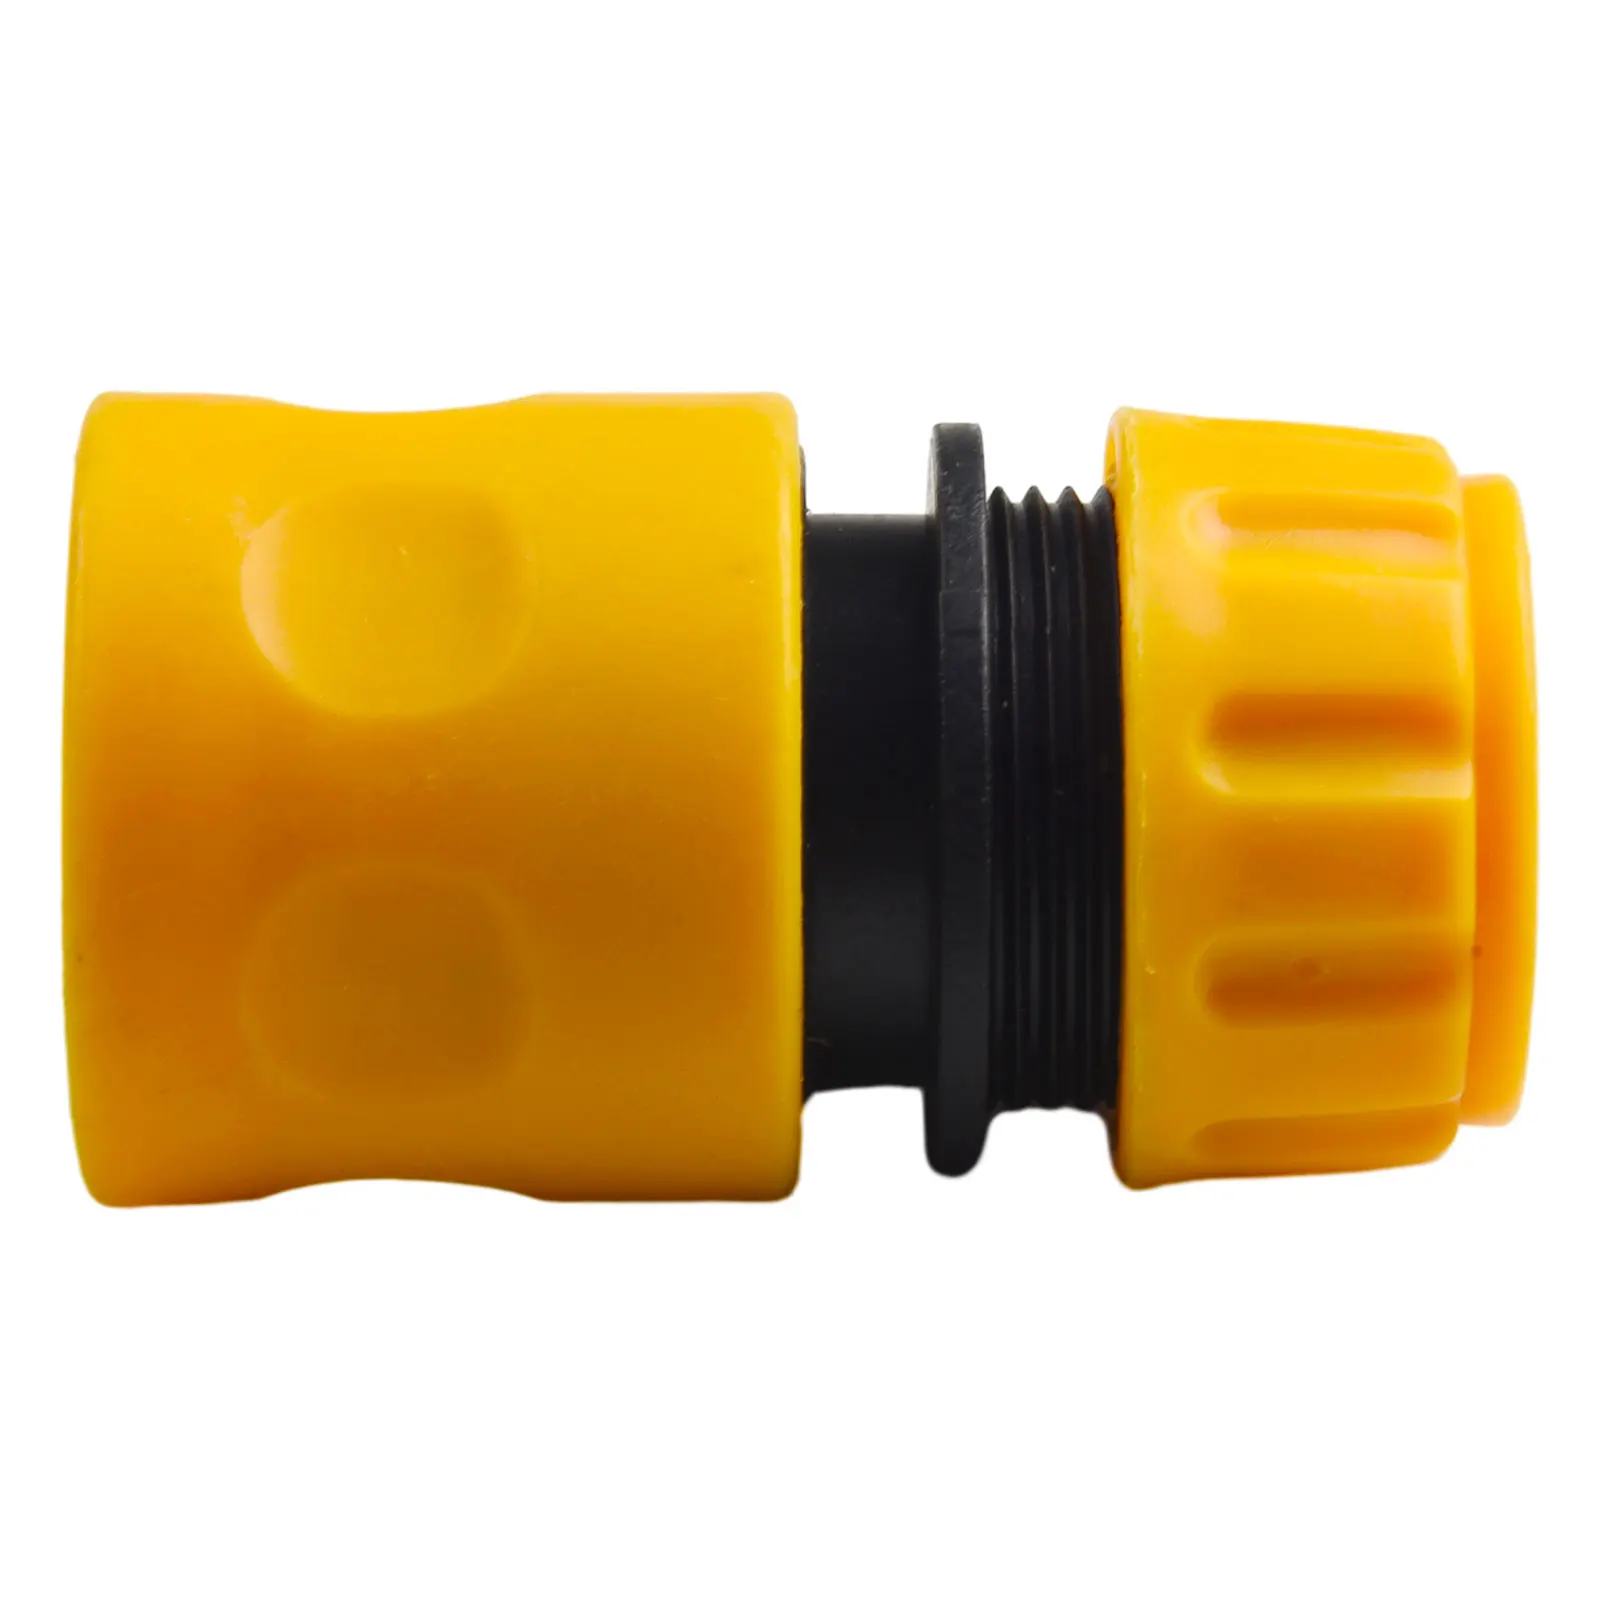 

1PC Water Connector For High Pressure Washer Fast Garden Hose Fitting Car Washer Adapter Water Connector Filter